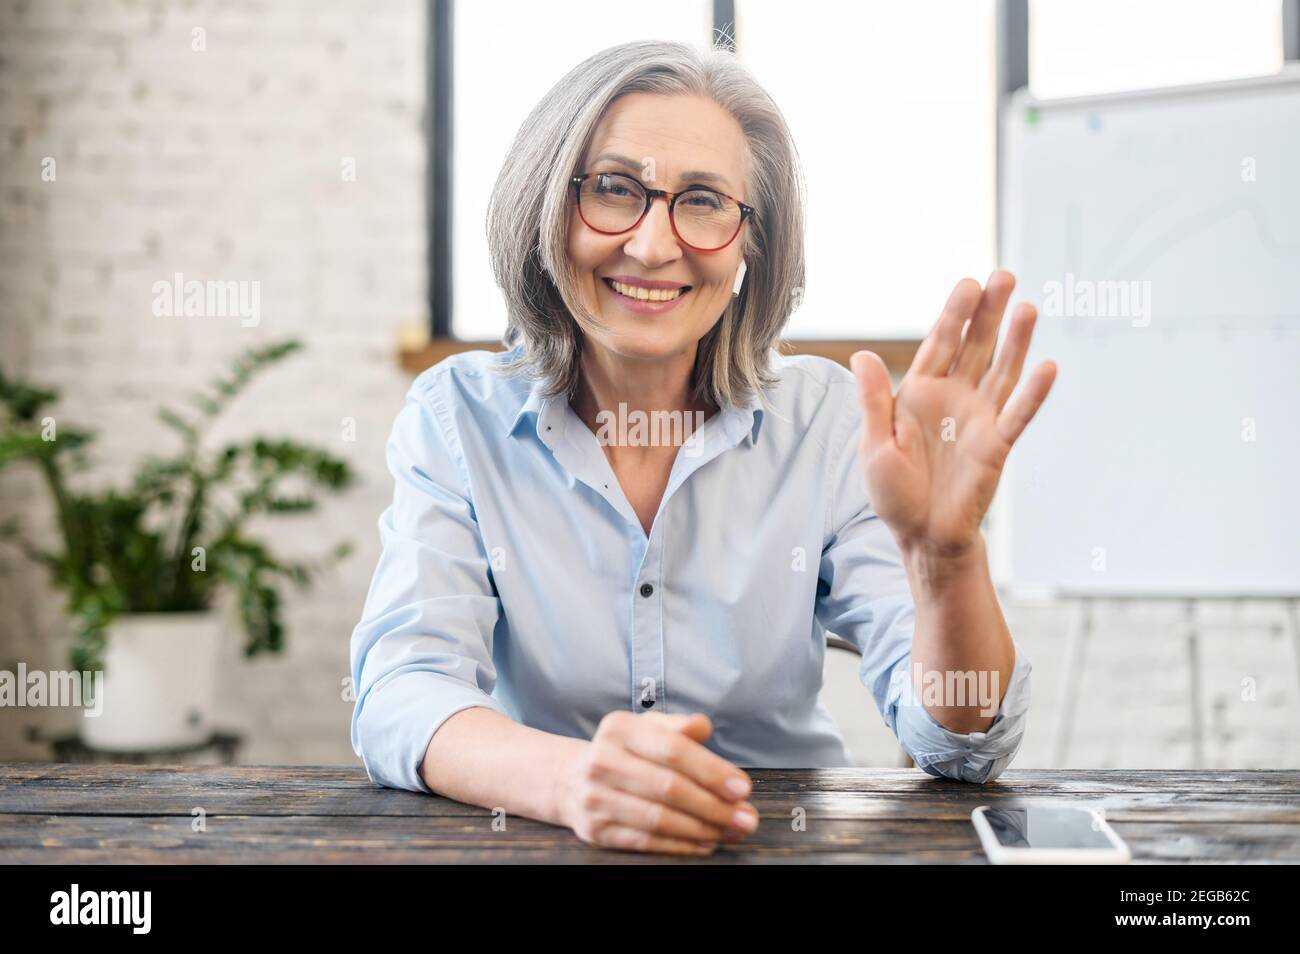 Video chat with a smiling senior elderly business woman. Webcam view of  charming aged coworker, mature female colleague waving into camera,  greeting Stock Photo - Alamy